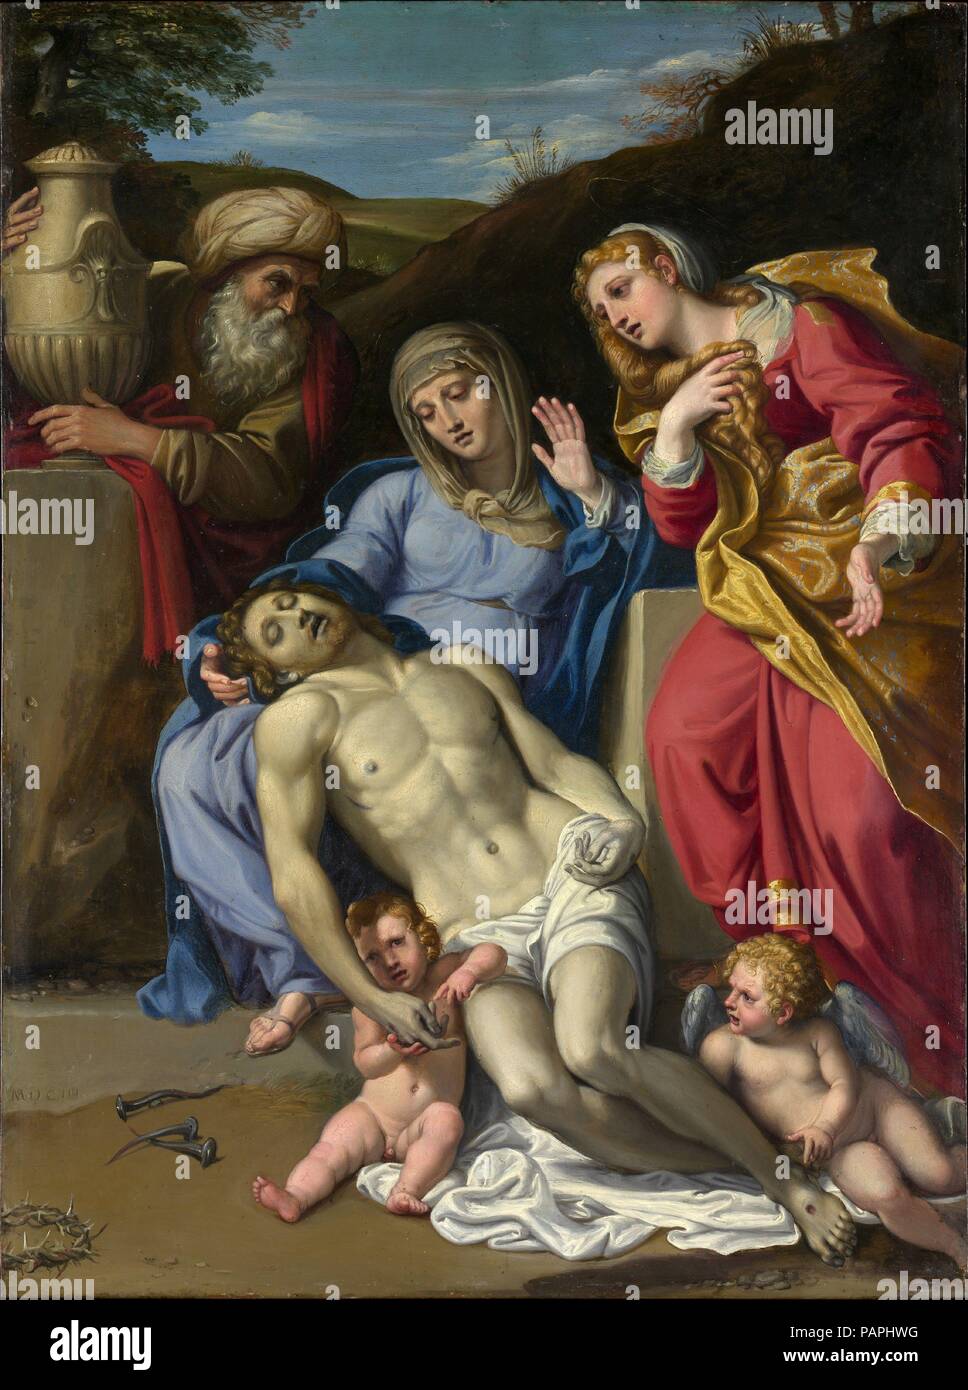 The Lamentation. Artist: Domenichino (Domenico Zampieri) (Italian, Bologna 1581-1641 Naples). Dimensions: 20 7/8 x 14 3/4 in. (53 x 37.5 cm). Date: 1603.  This beautifully preserved picture was painted by Domenichino a year after he moved from his native Bologna to Rome. The composition repeats that of a large altarpiece designed by Annibale Carracci for the church of San Francesco a Ripa, Rome (now in the Louvre, Paris) and this explains why, in the past, the picture was ascribed to Annibale rather than to Domenichino. Annibale greatly admired the talent of his young assistant, who in this pi Stock Photo